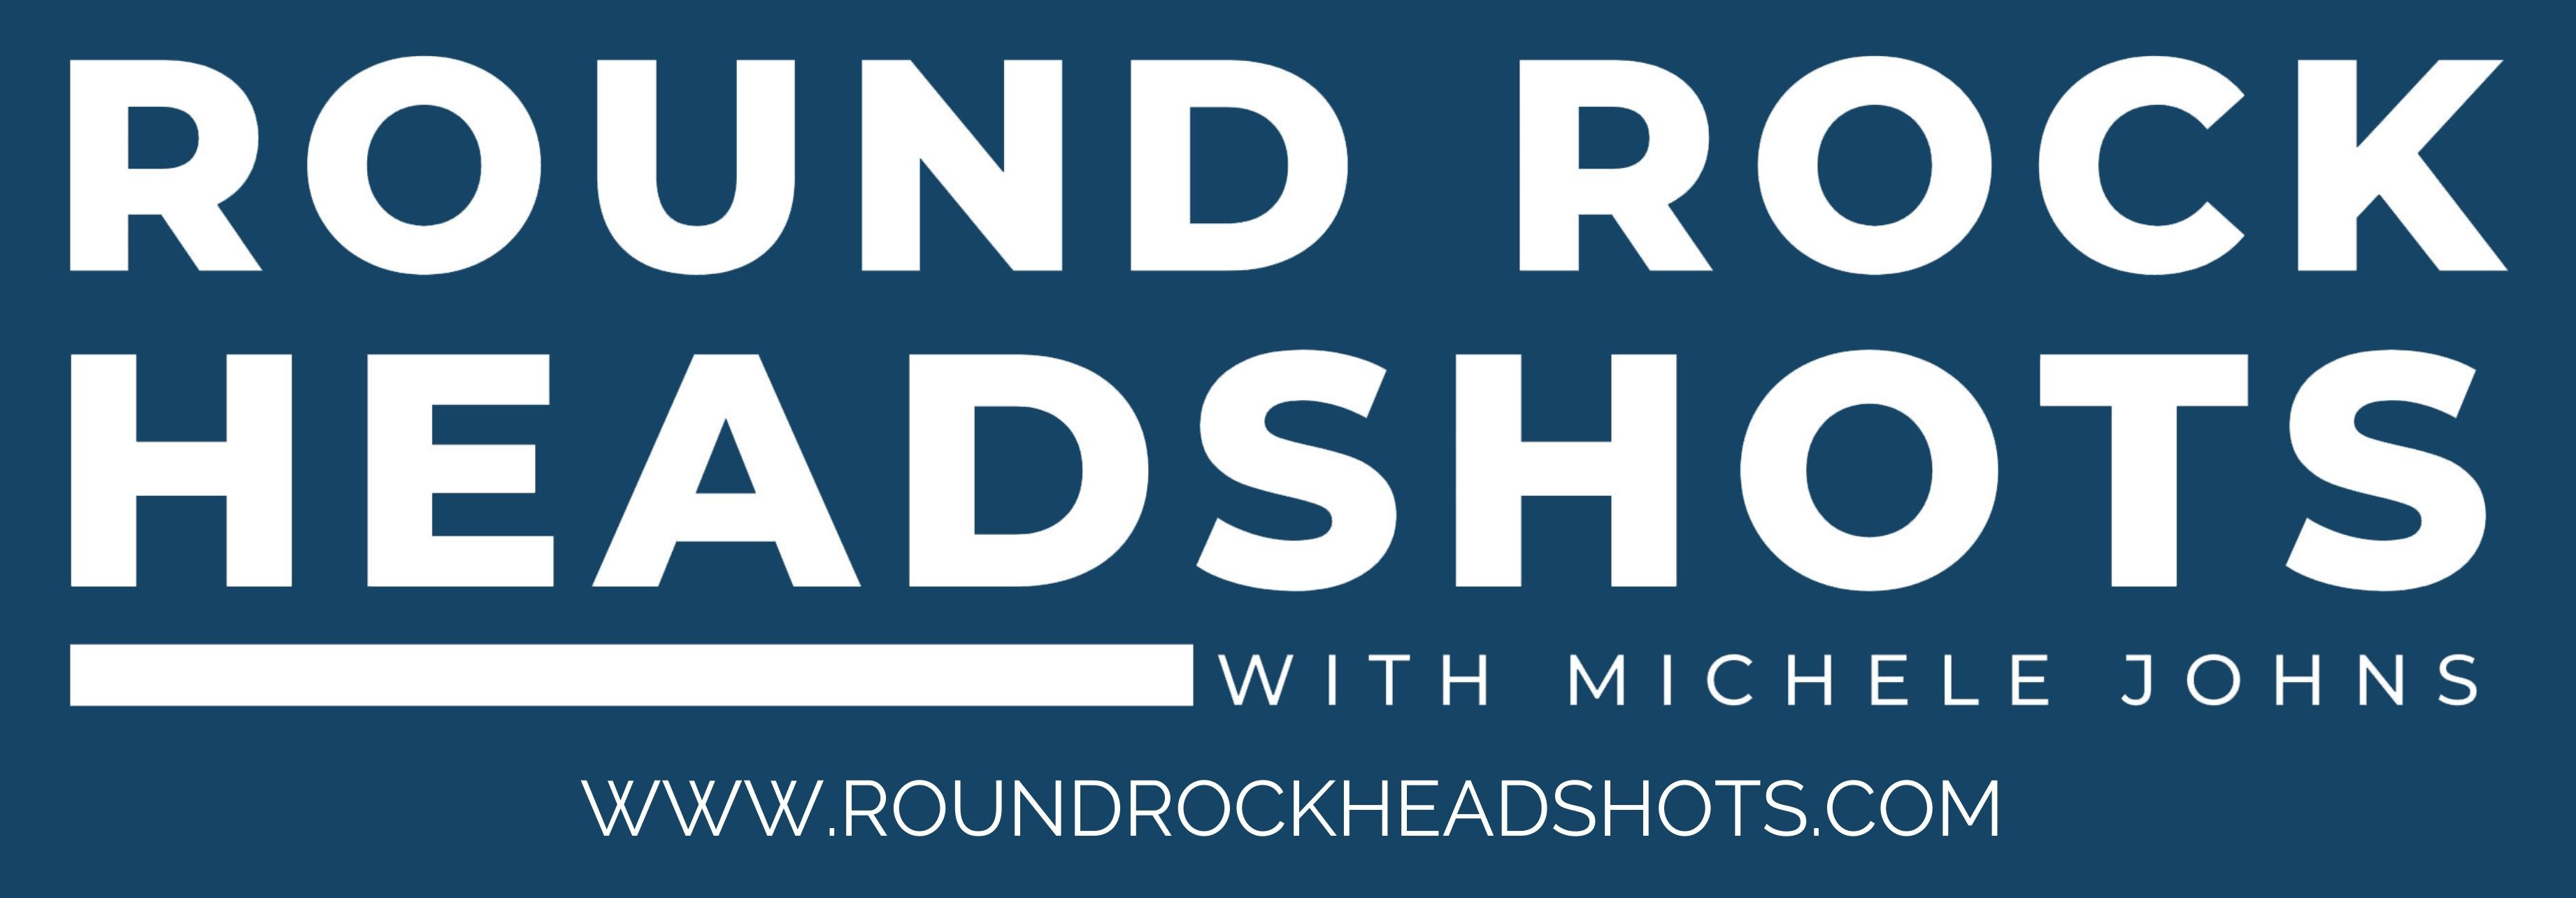 Round Rock Headshots with Michele Johns Photography